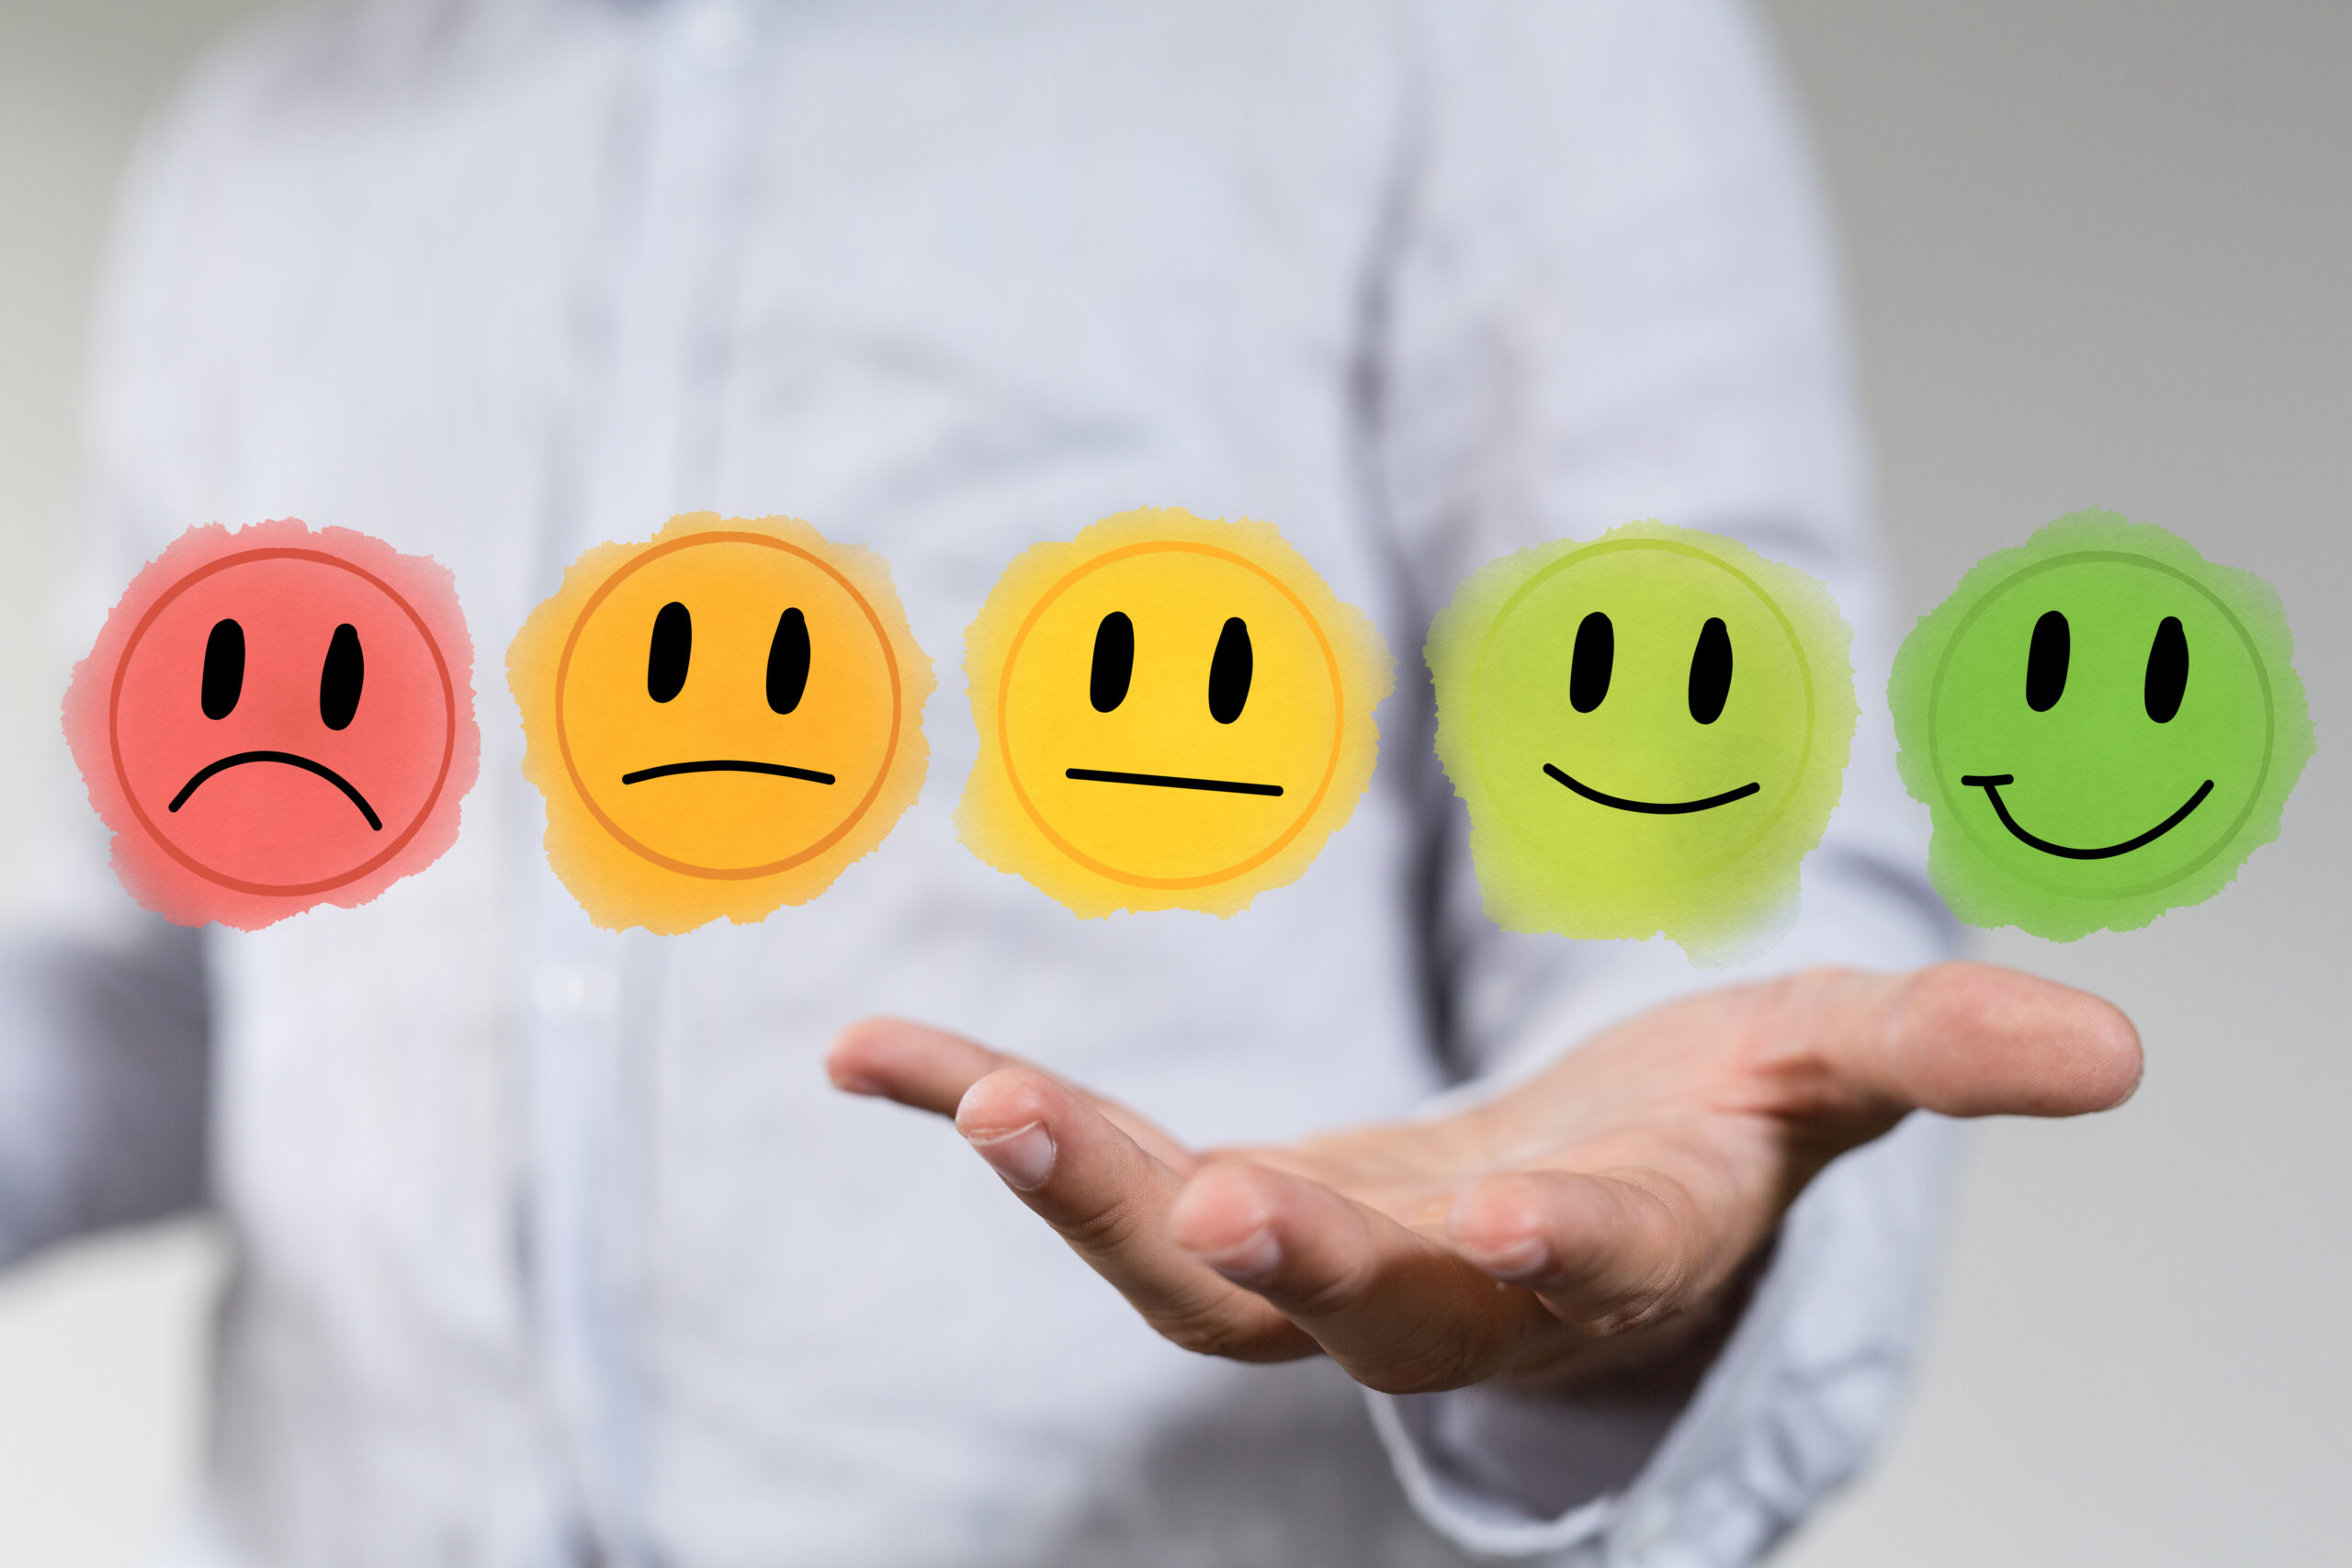 A range of different emotions, from frowning to smiling [Do You Need an Attitude Adjustment?]